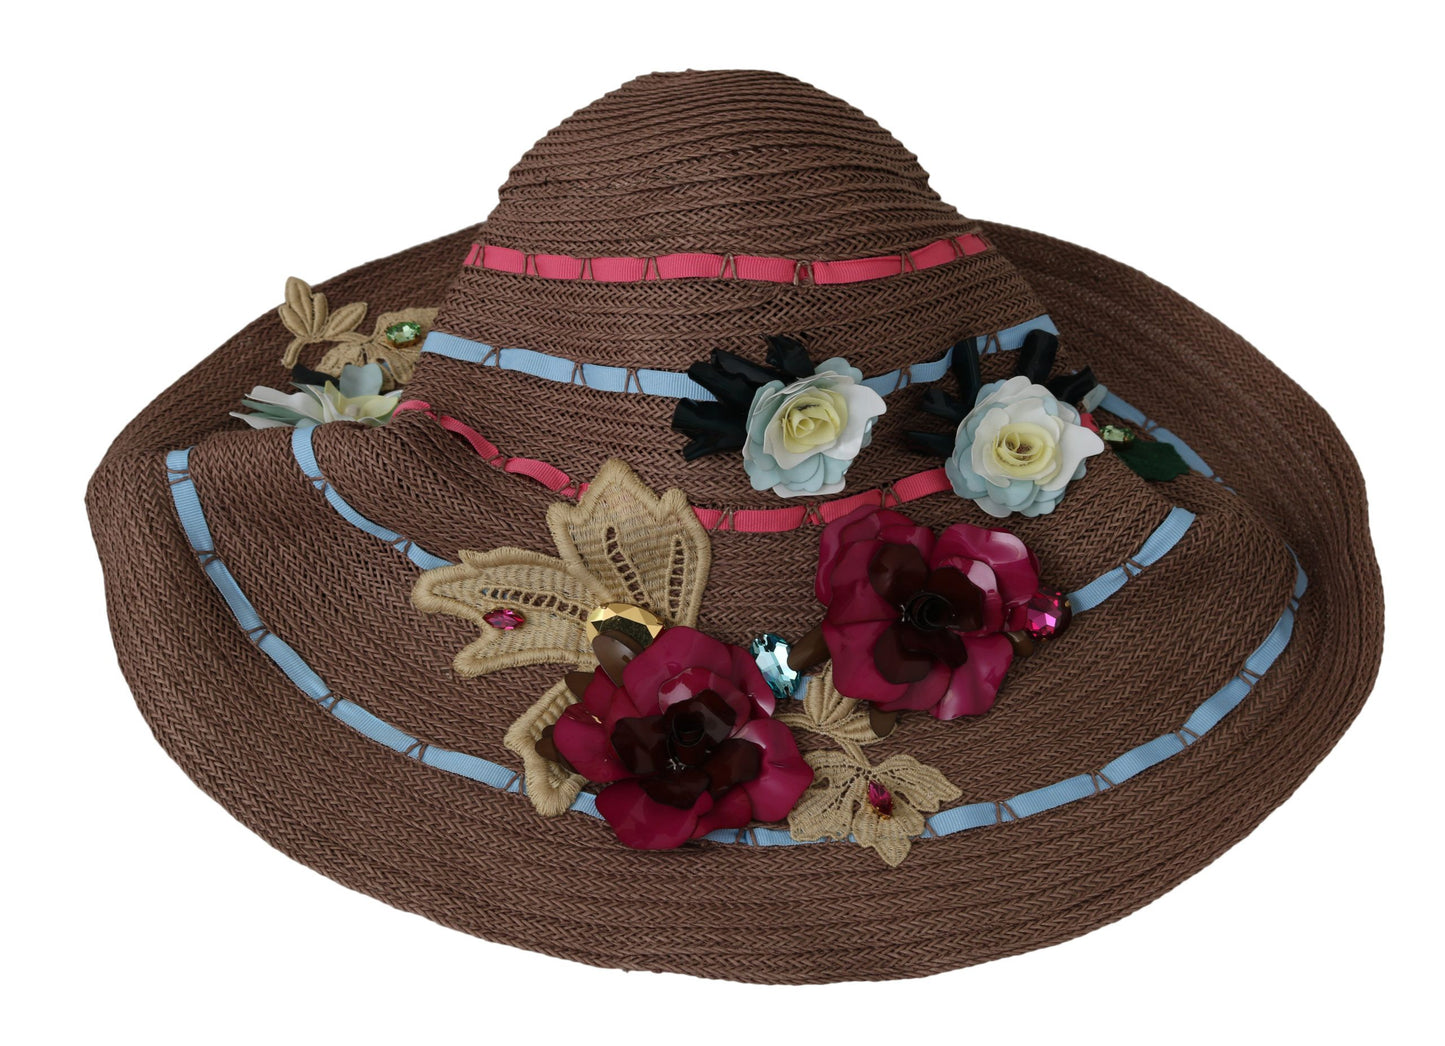 Elegant Floppy Straw Hat with Floral Accents